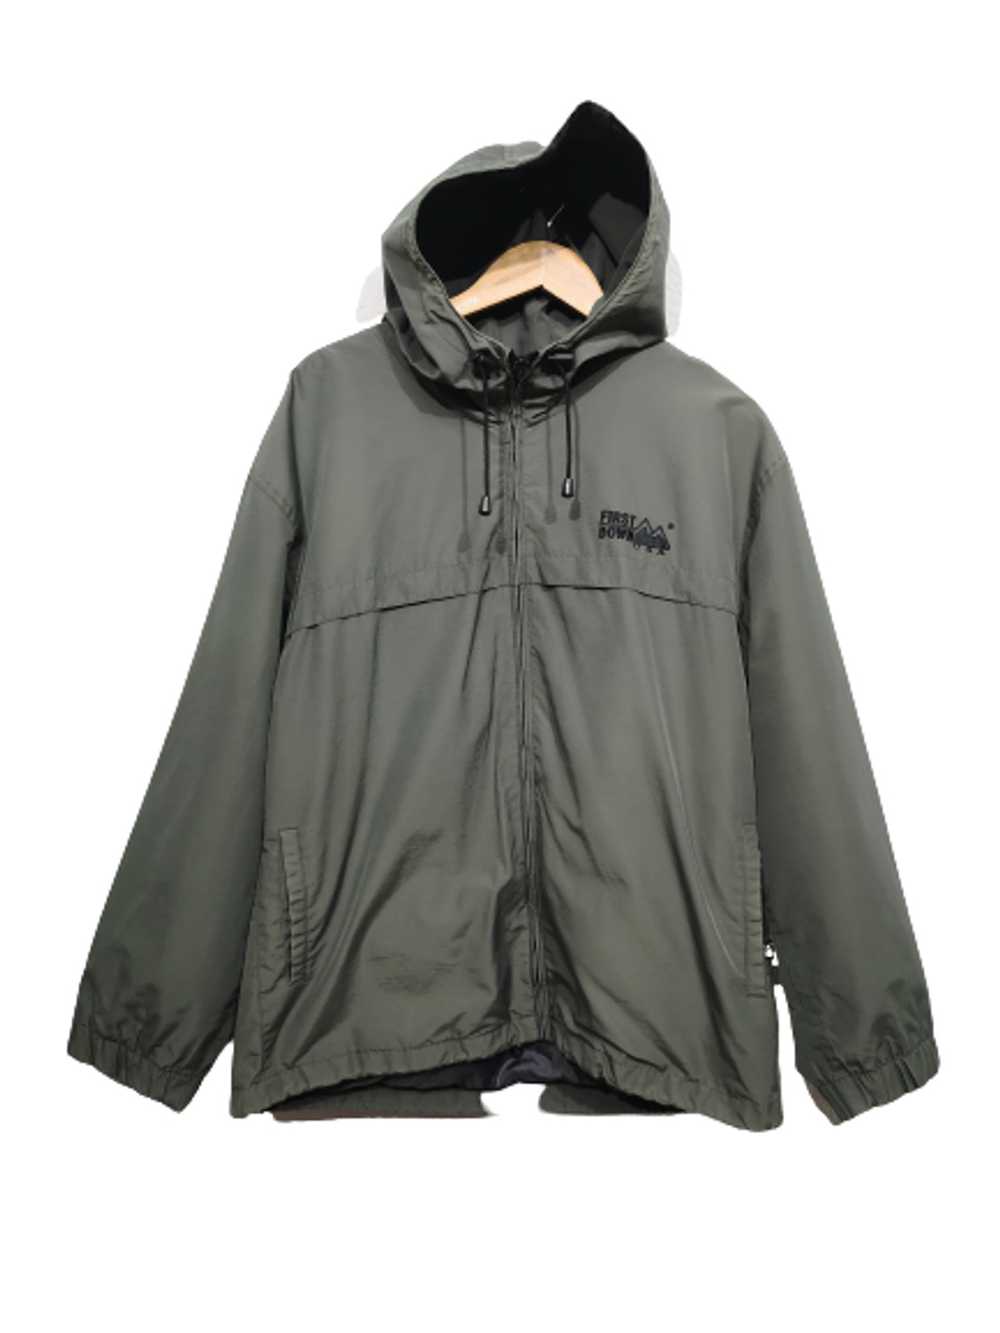 Japanese Brand × Outdoor Life First Down Hiking Jacket - Gem